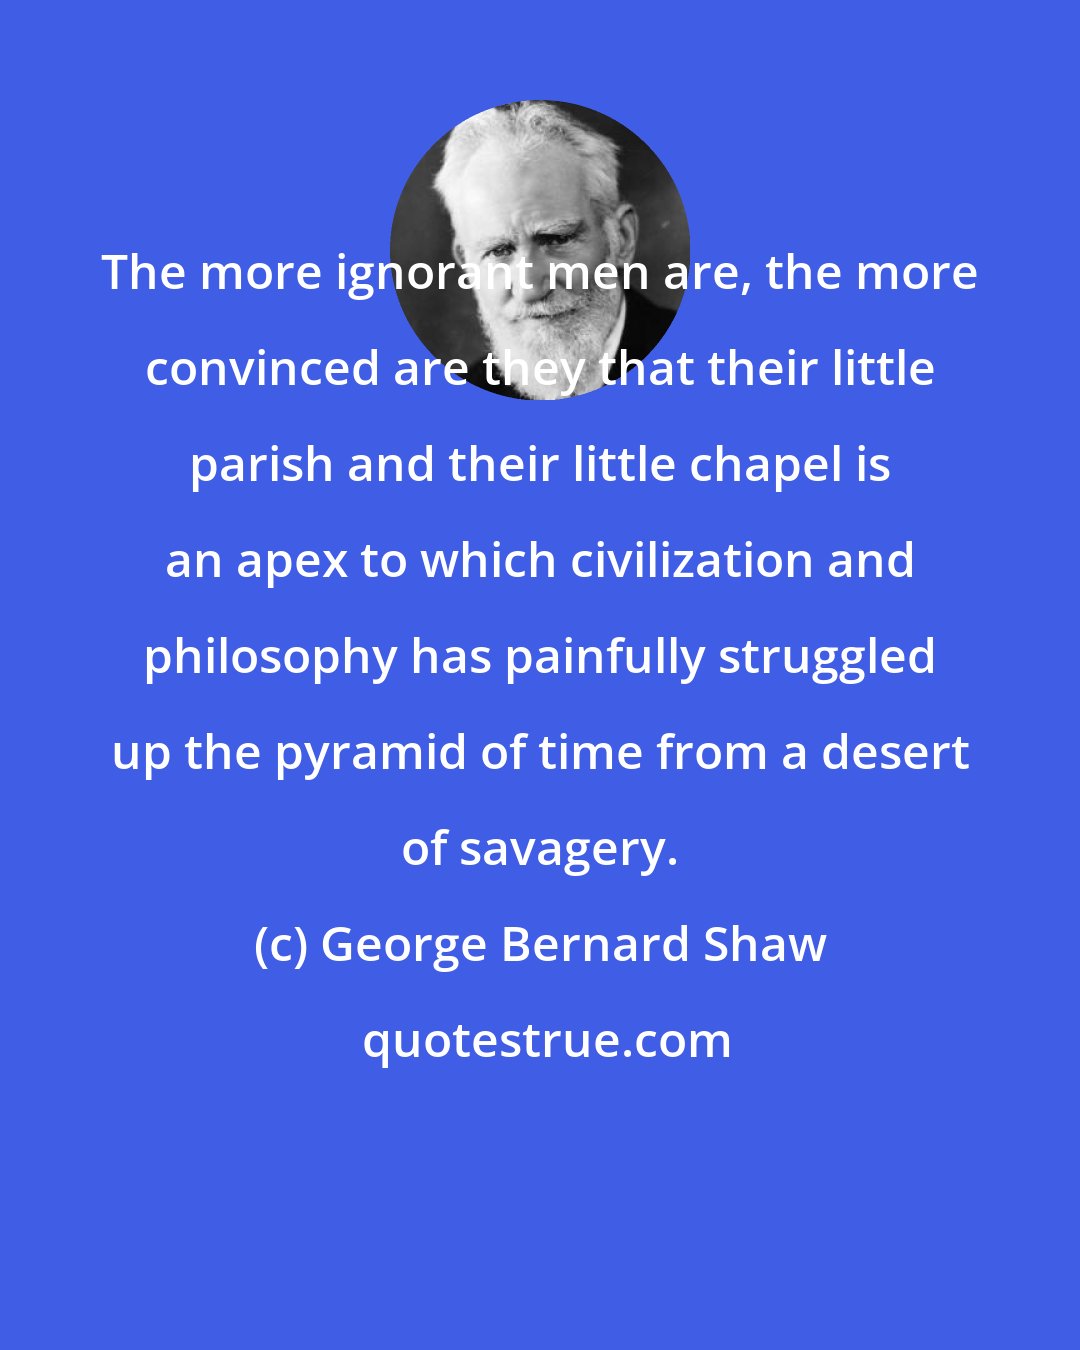 George Bernard Shaw: The more ignorant men are, the more convinced are they that their little parish and their little chapel is an apex to which civilization and philosophy has painfully struggled up the pyramid of time from a desert of savagery.